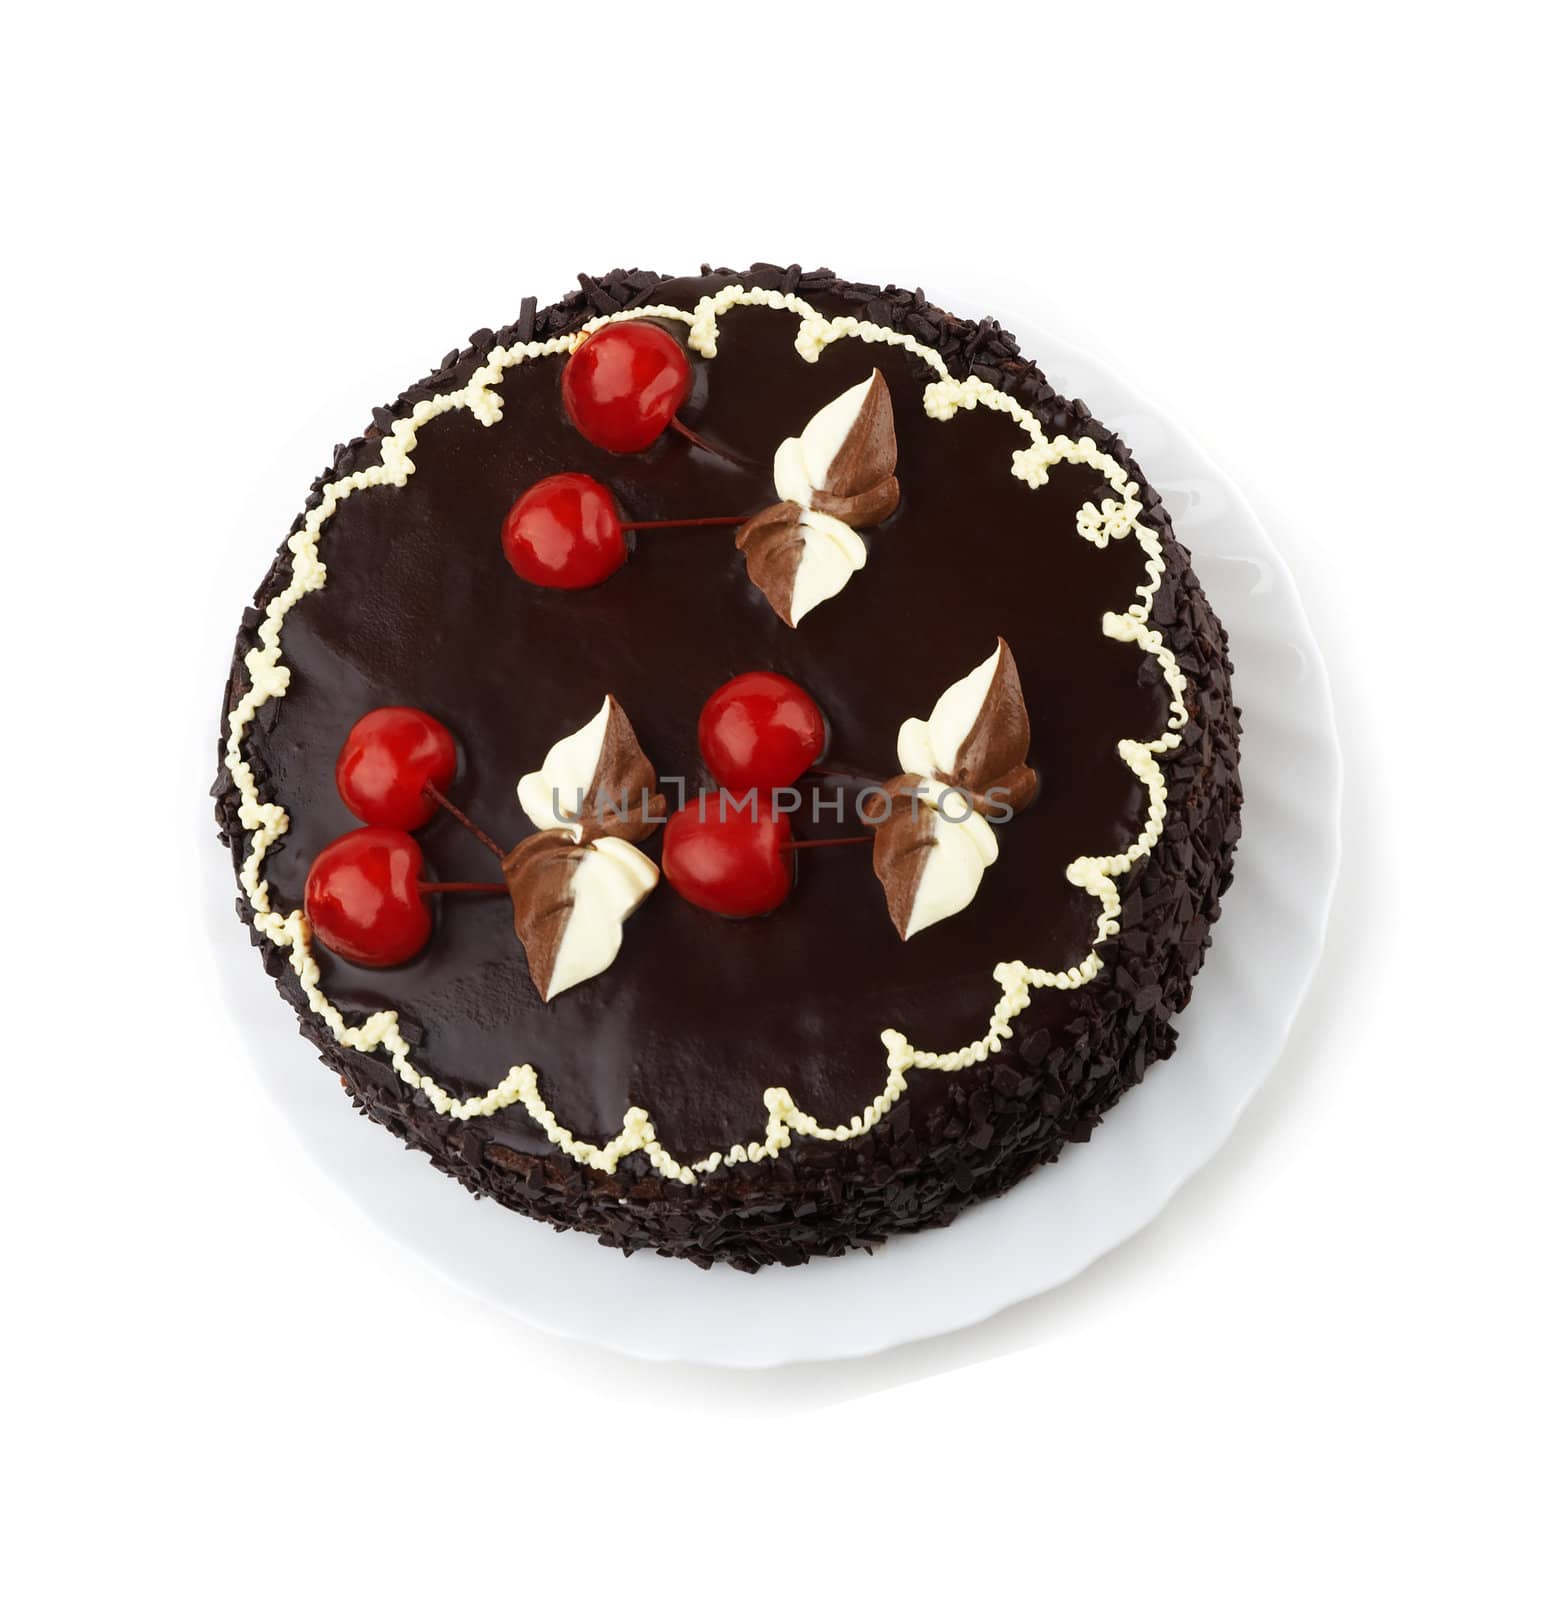 isolated fancy cake, focus point on the center of the photo